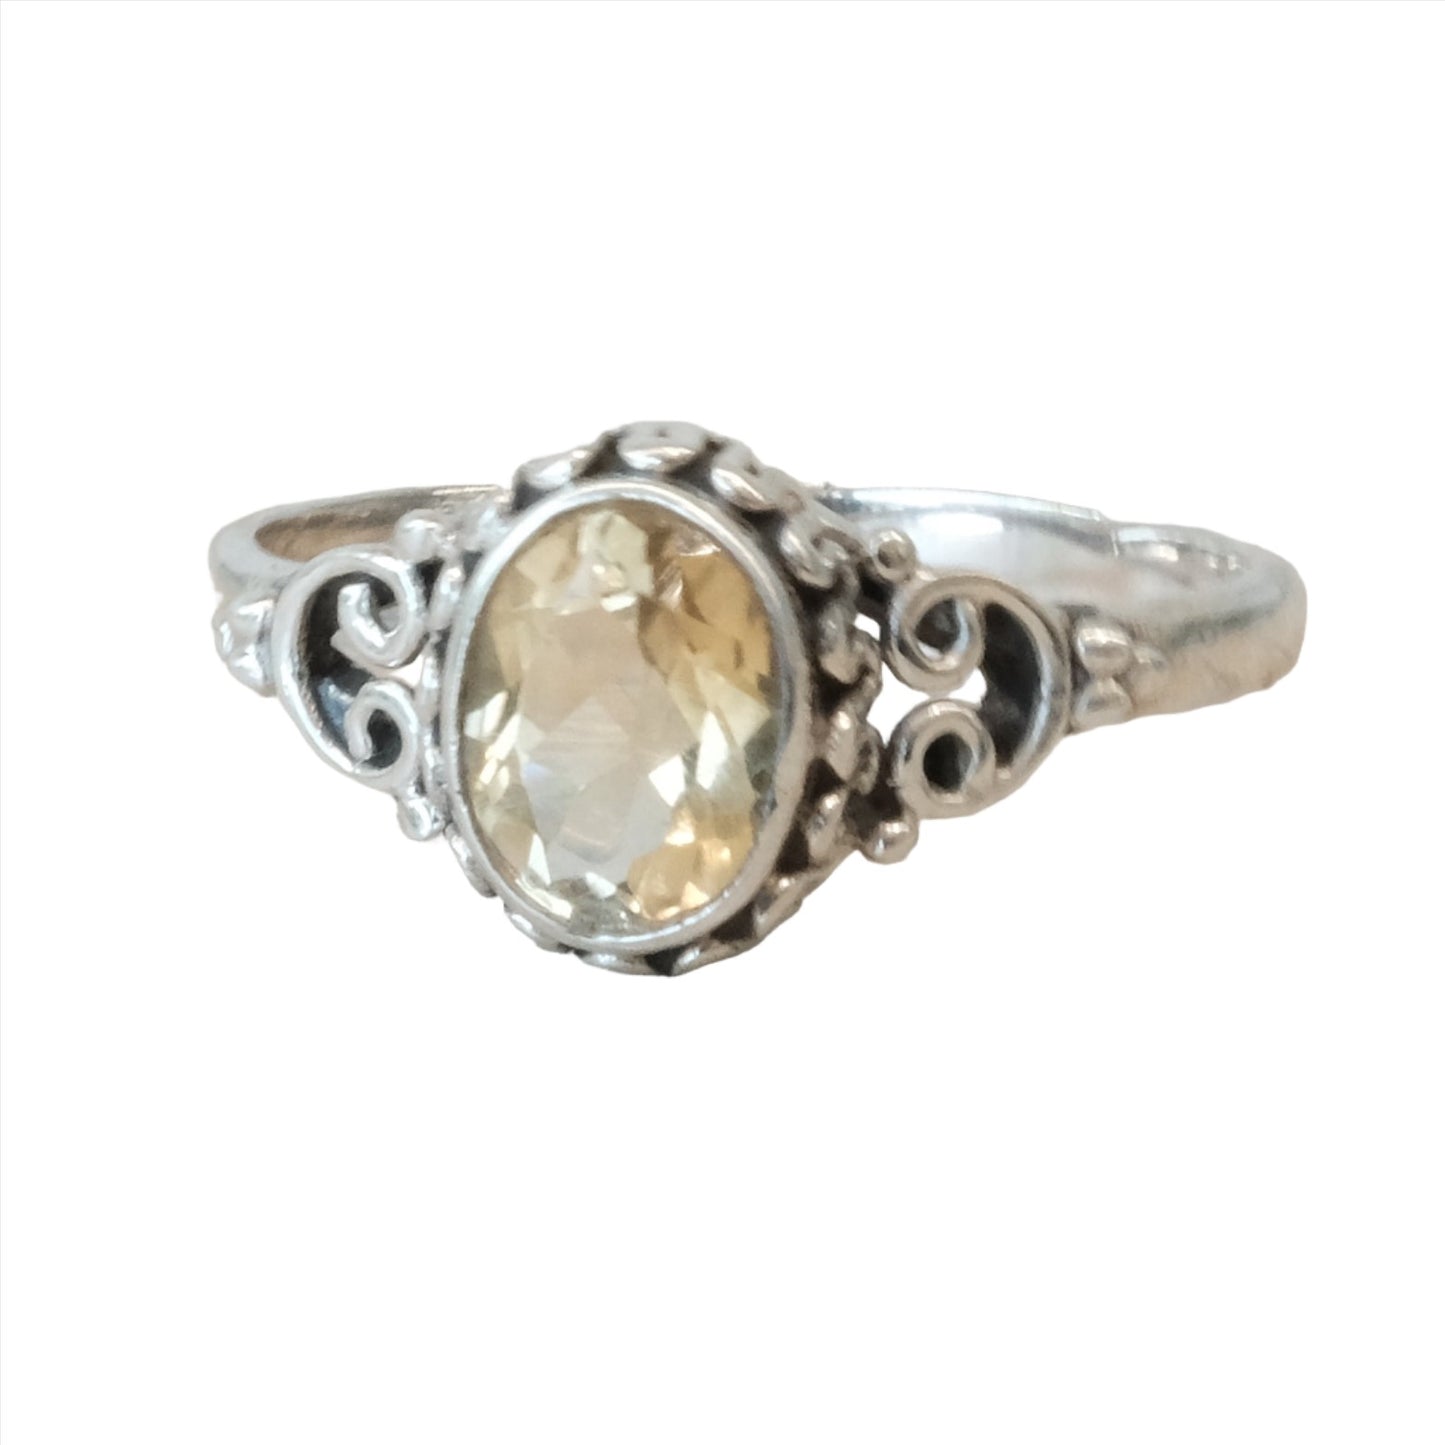 Citrine Sterling Silver Ring Size 9